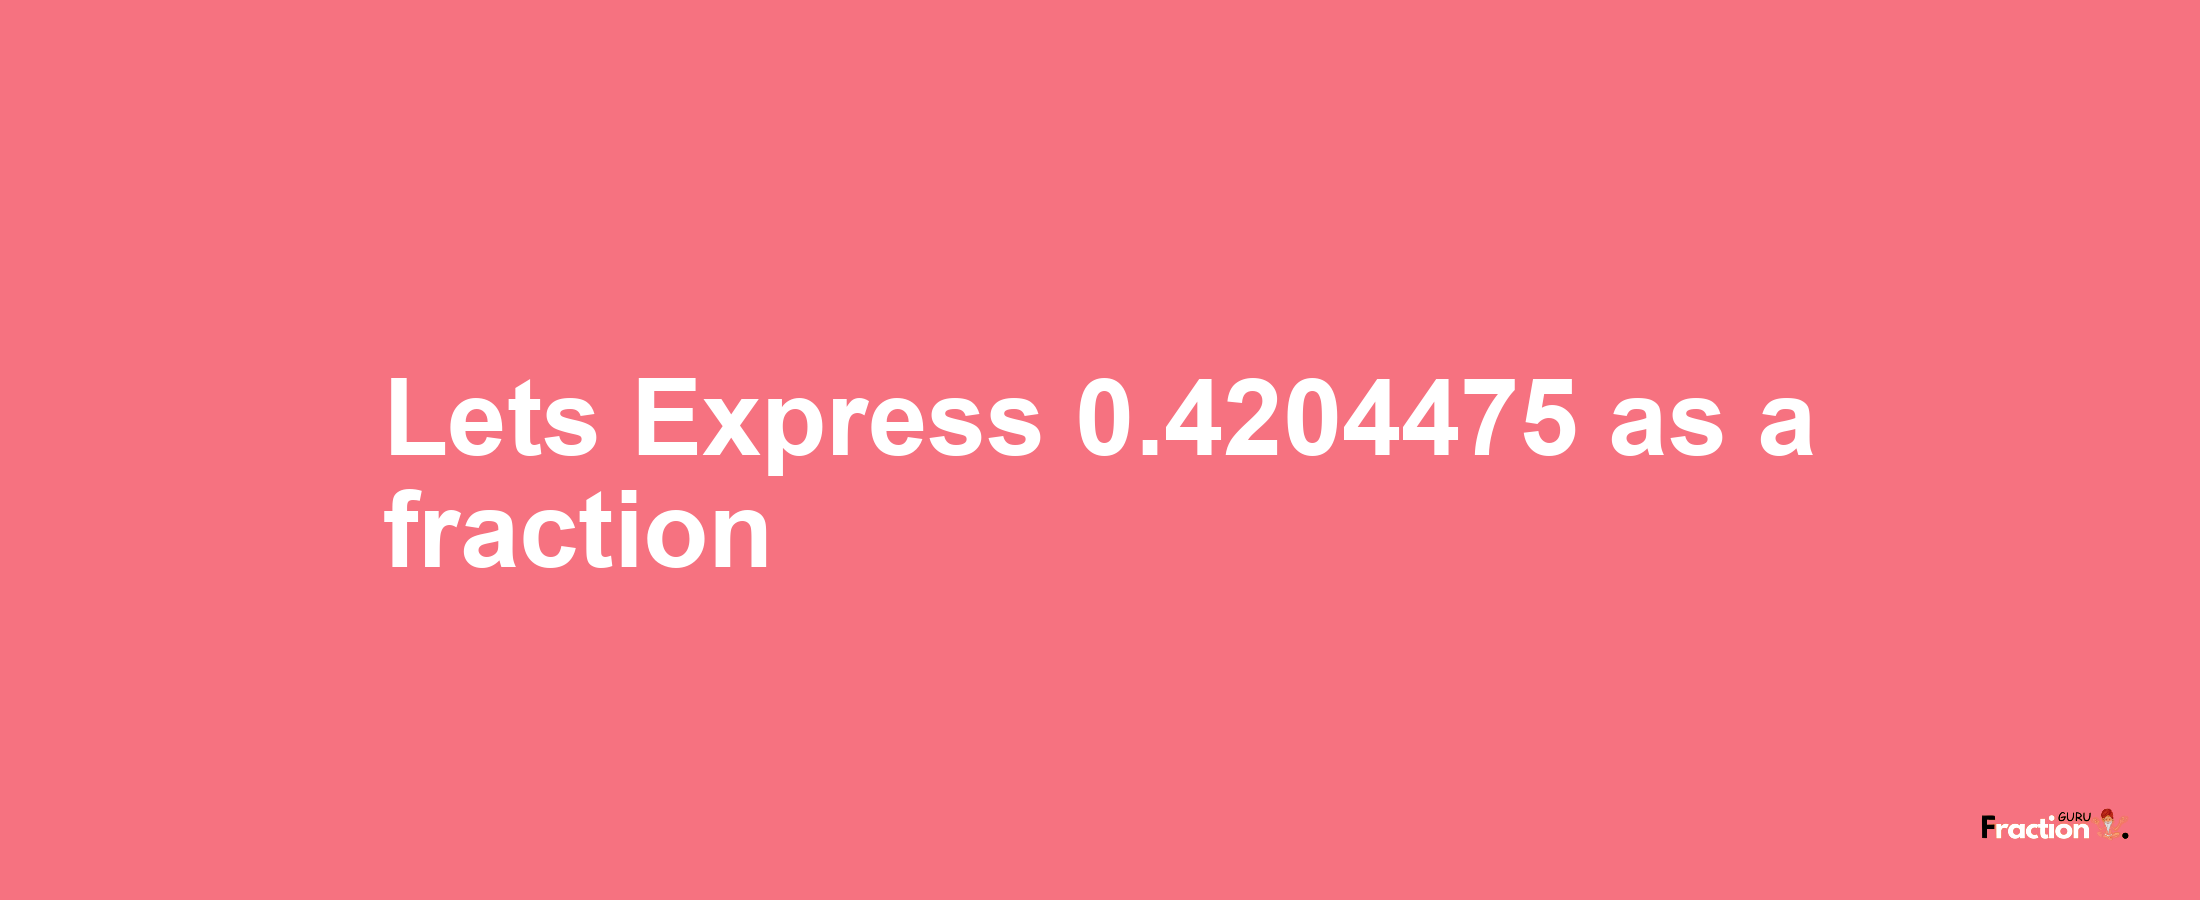 Lets Express 0.4204475 as afraction